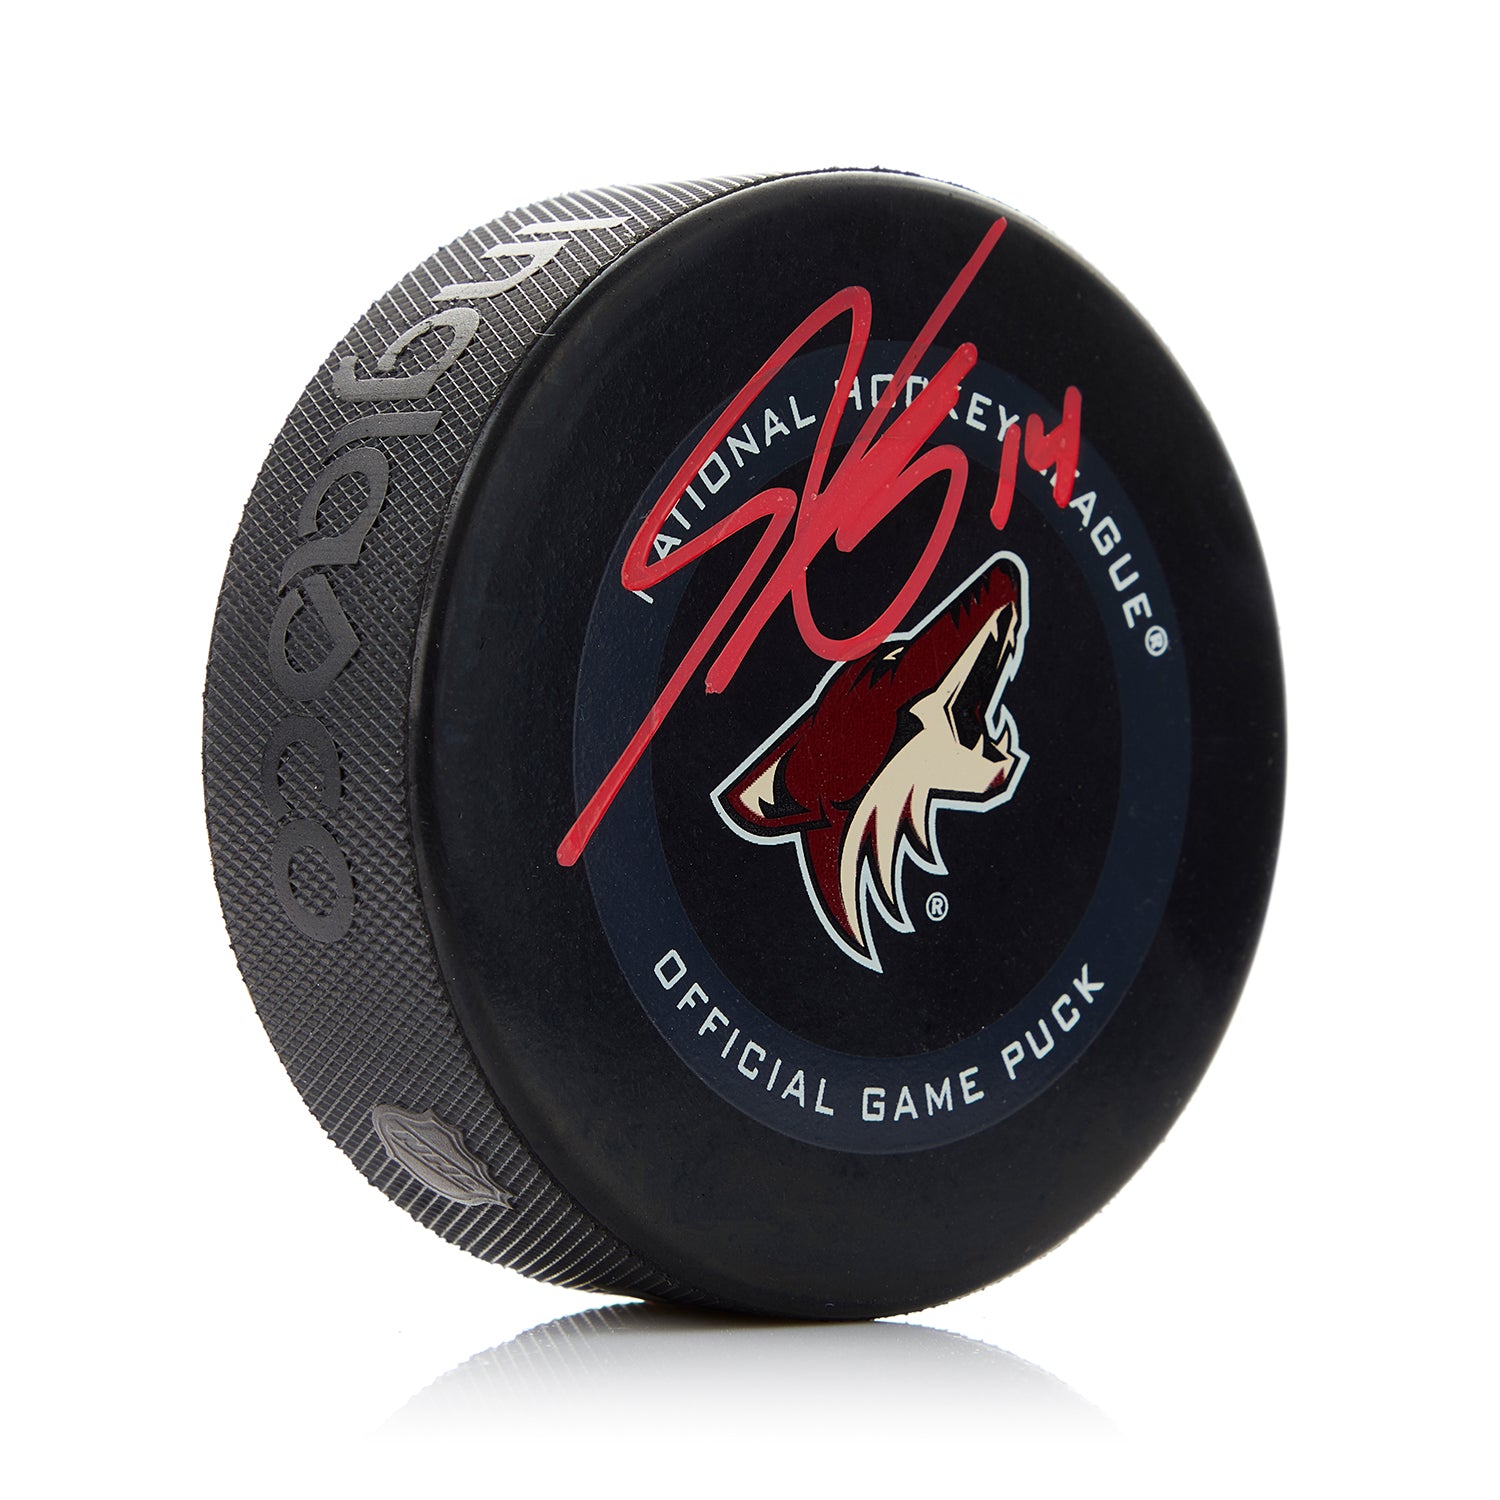 Shayne Gostisbehere Autographed Arizona Coyotes Official Game Puck